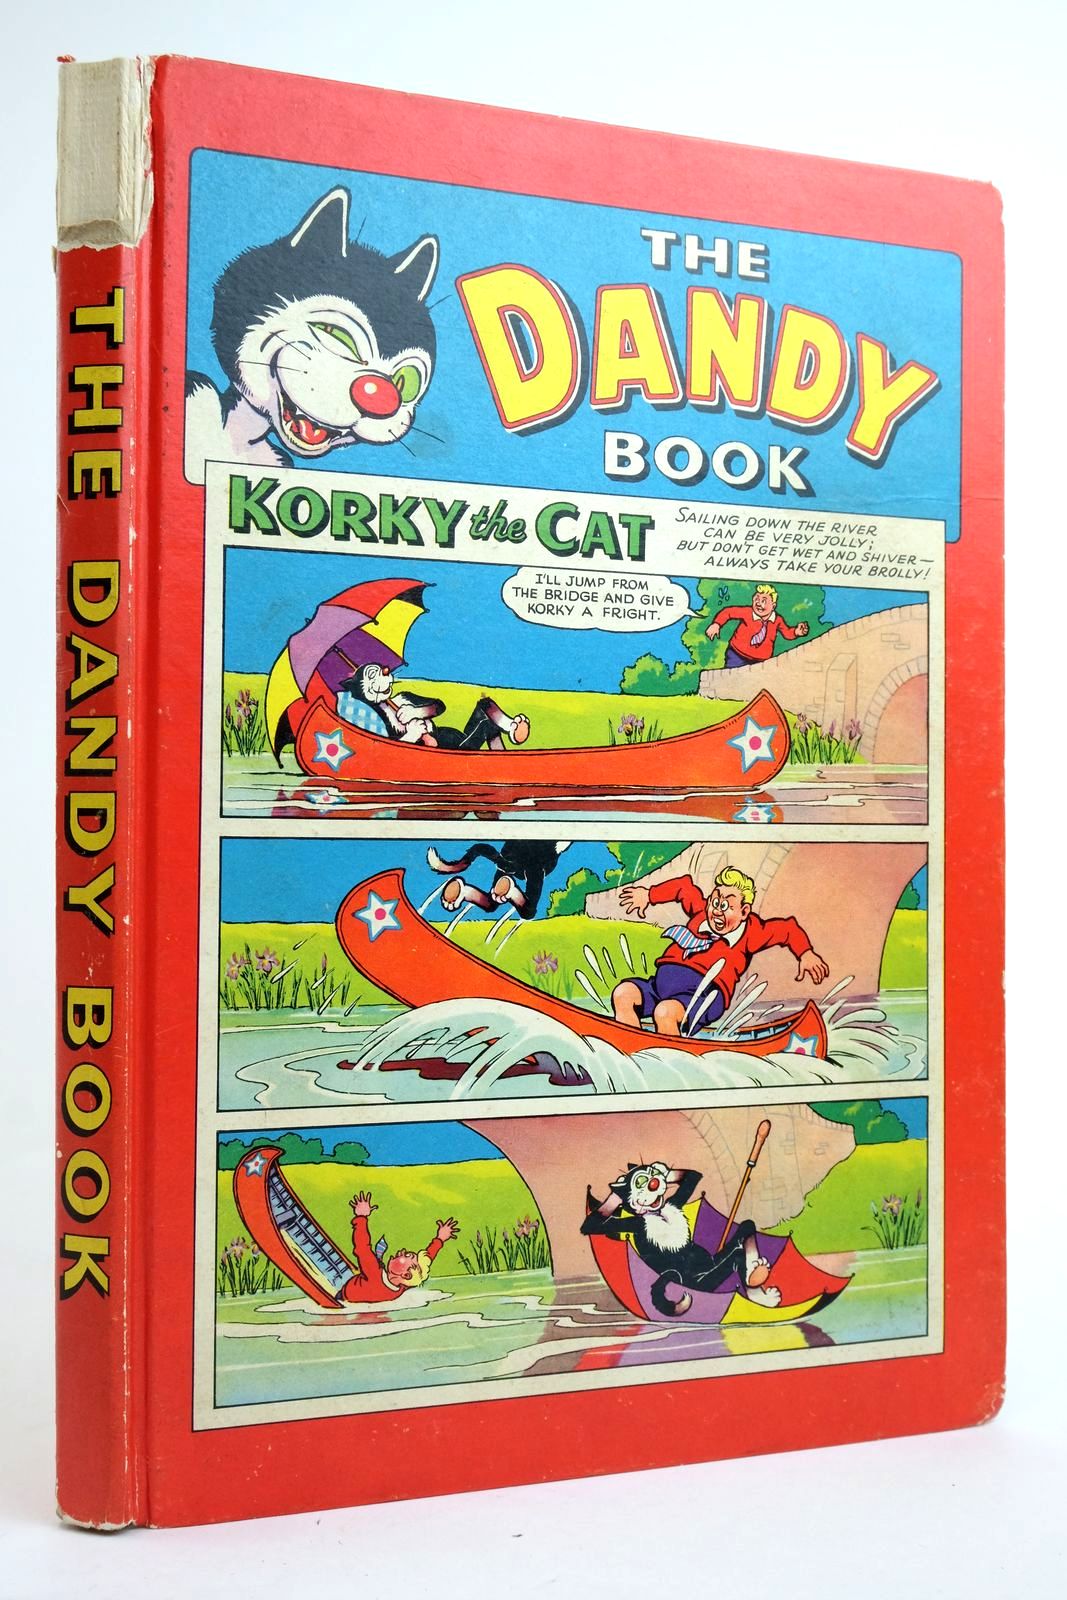 Photo of THE DANDY BOOK 1959 published by D.C. Thomson & Co Ltd. (STOCK CODE: 2135743)  for sale by Stella & Rose's Books